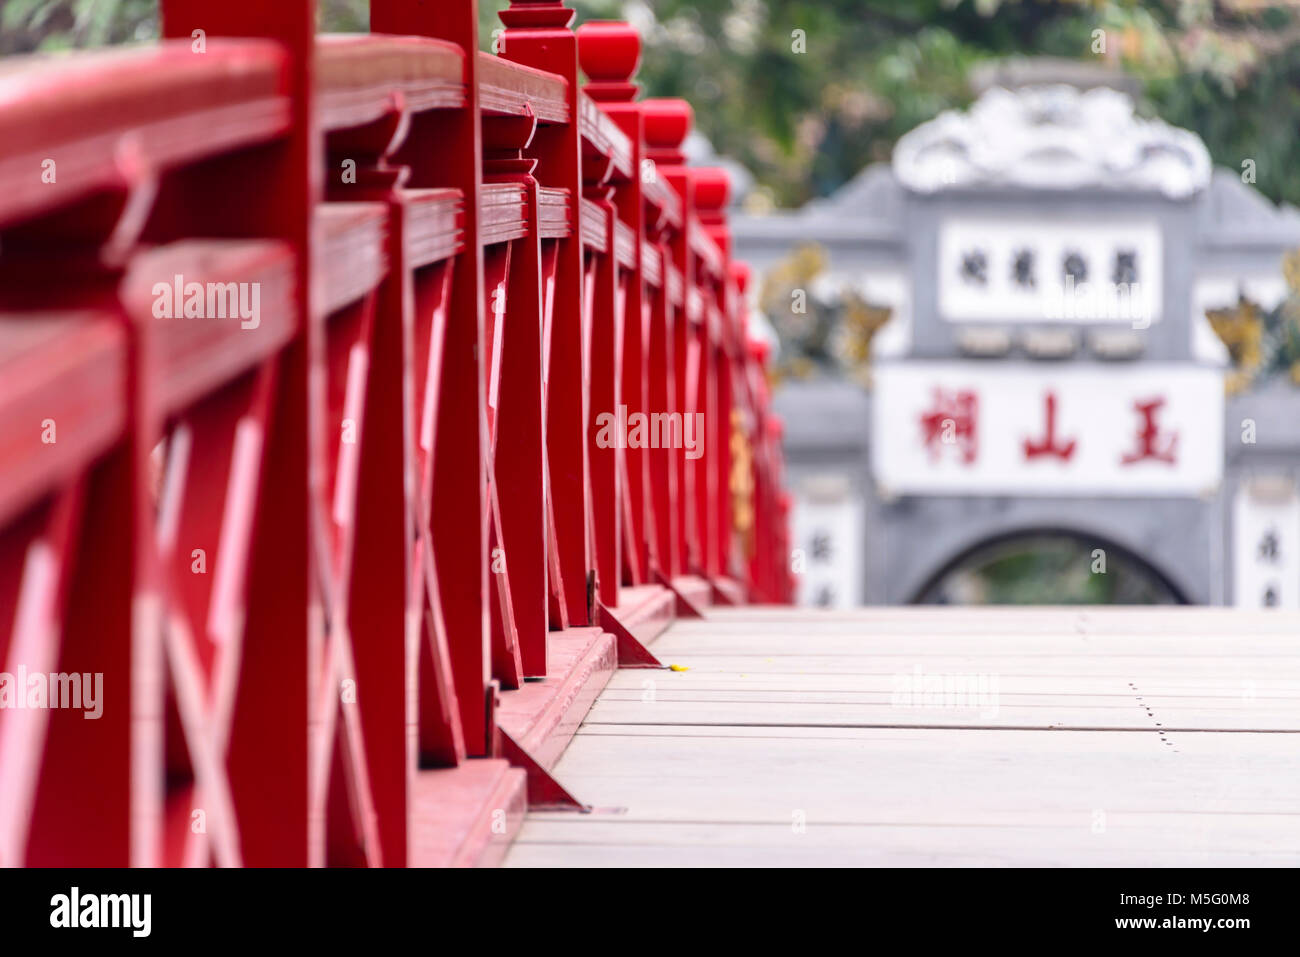 The iconic red painted Huc Bridge over Ho Hoan Kiem Lake, Hanoi, Vietnam which leads to the Den Ngoc Son Confucious Temple. Stock Photo